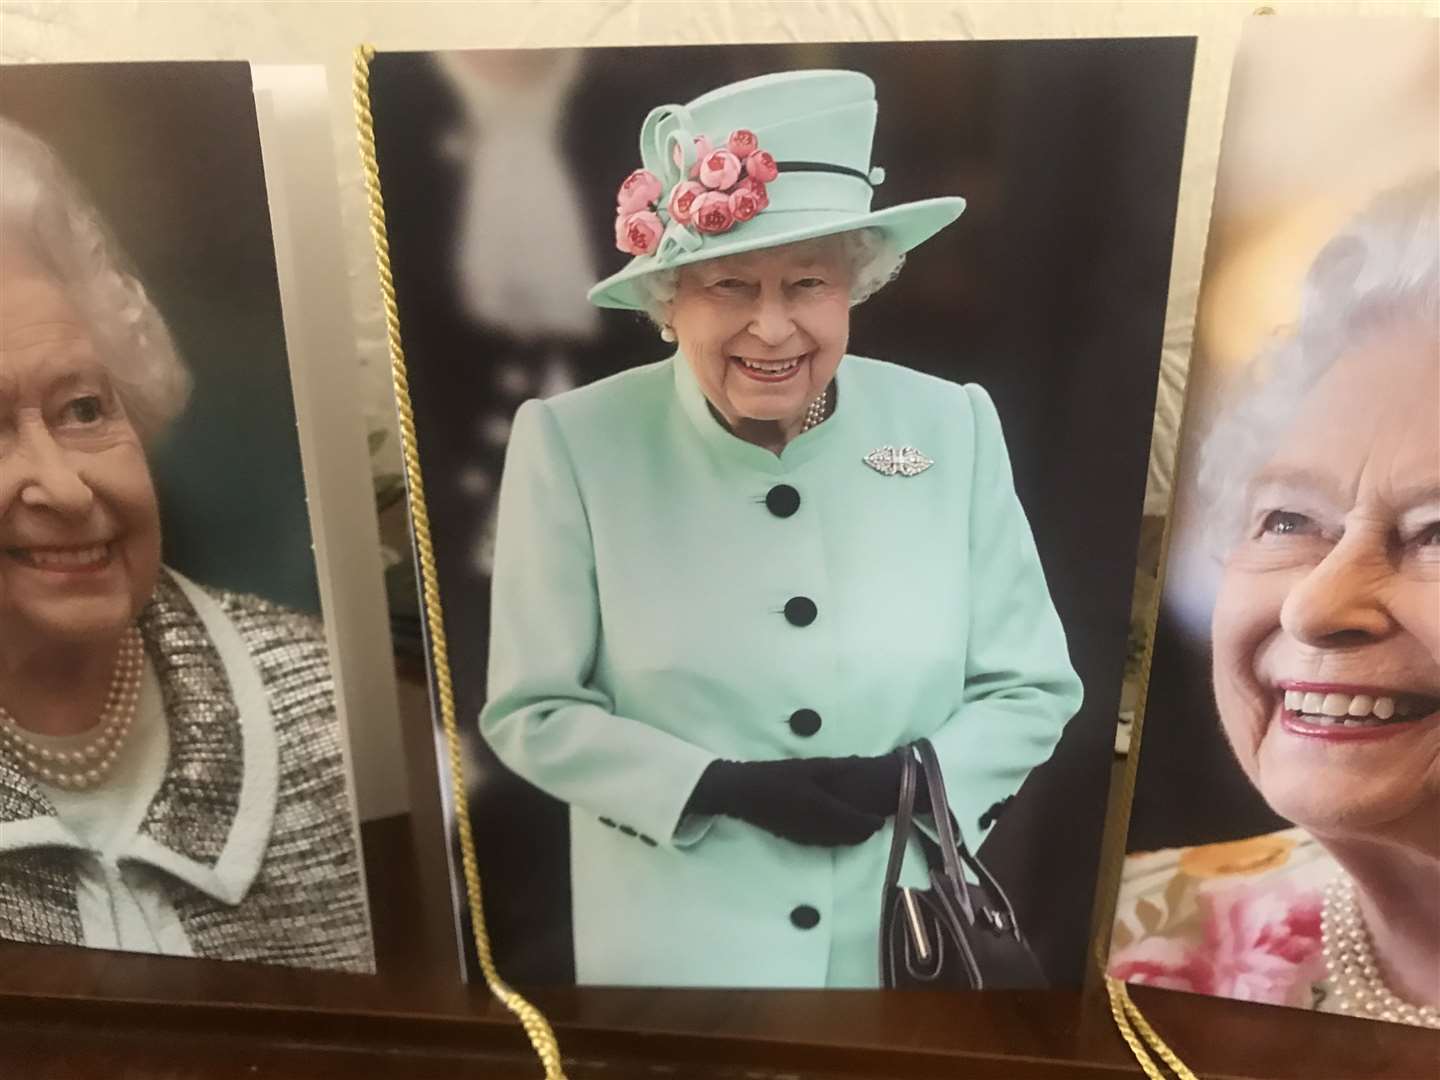 This year's card shows The Queen in a mint green coat and hat